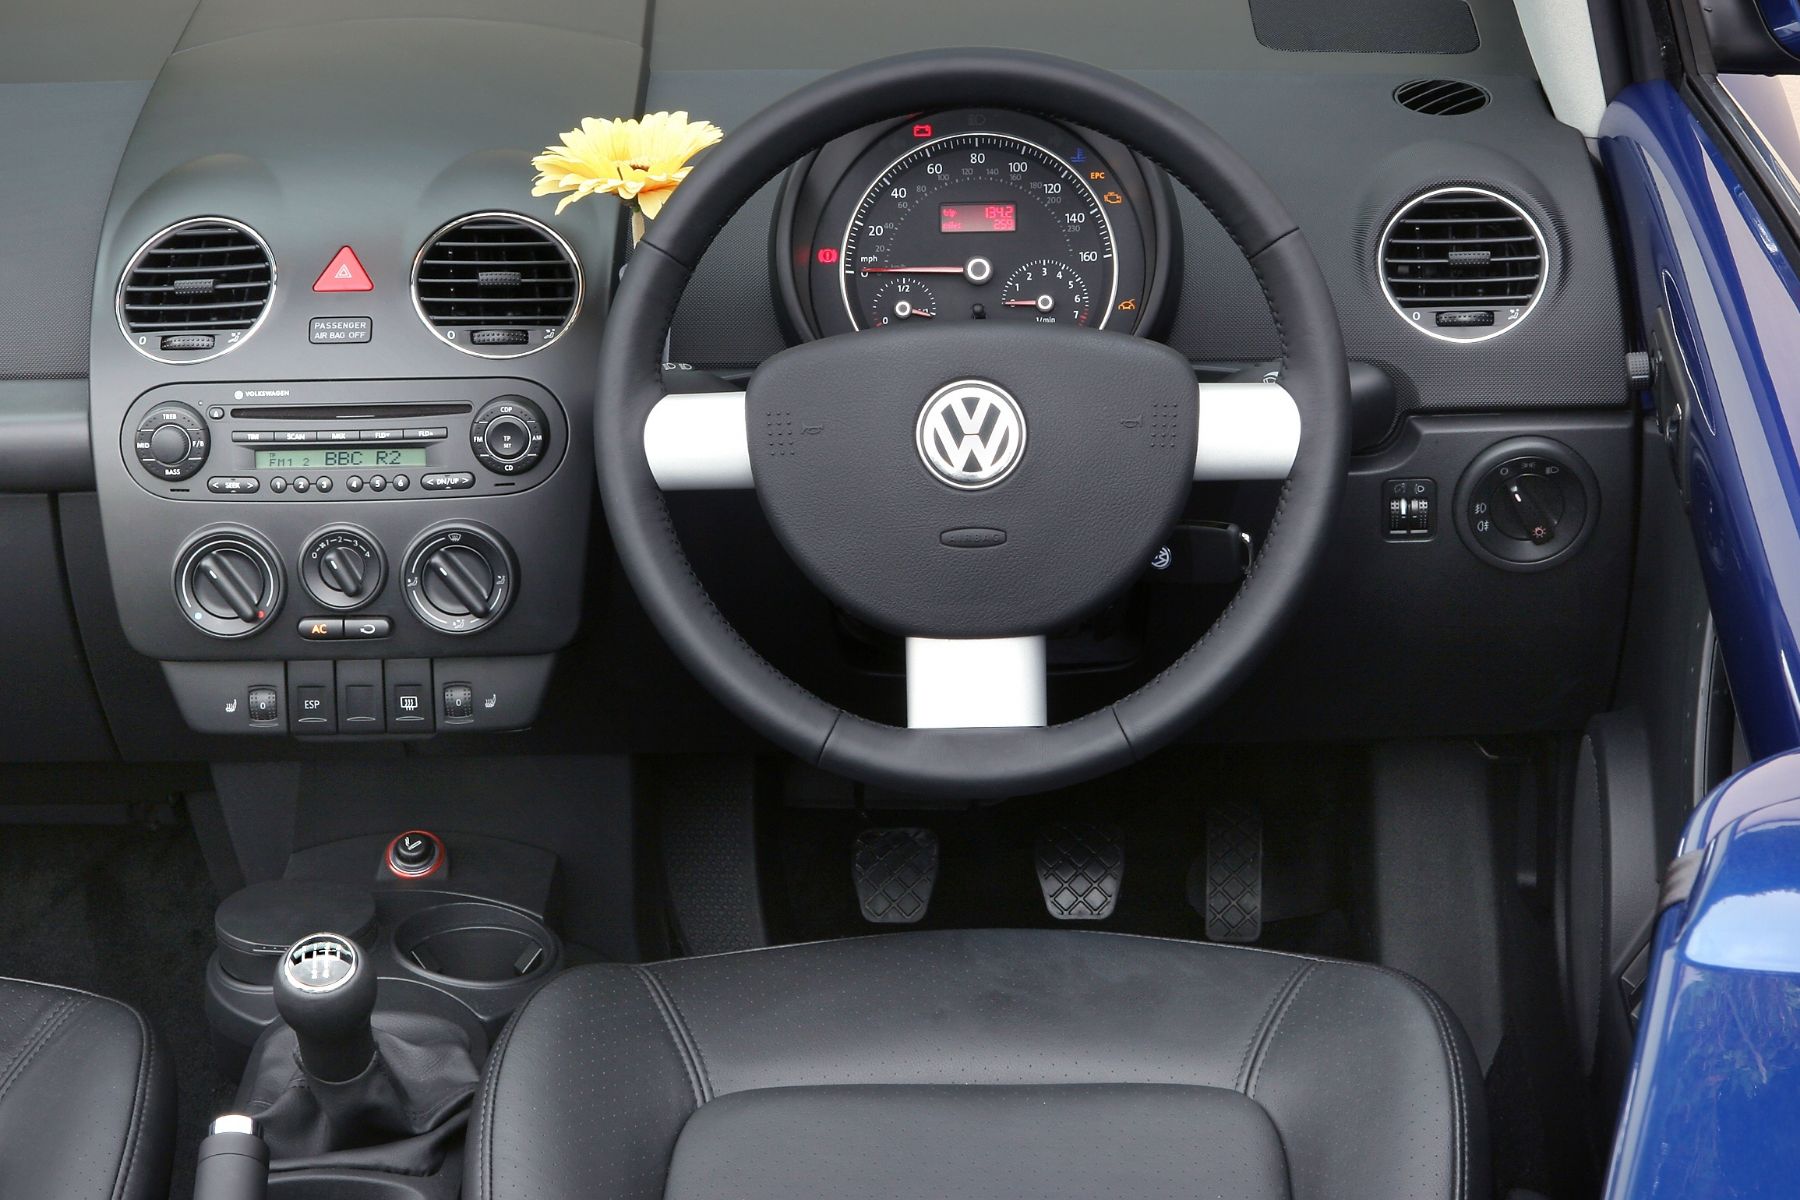 Details about  / VOLKSWAGEN Bug New Beetle Interior Console Dashboard Flower WHITE BUBBLE